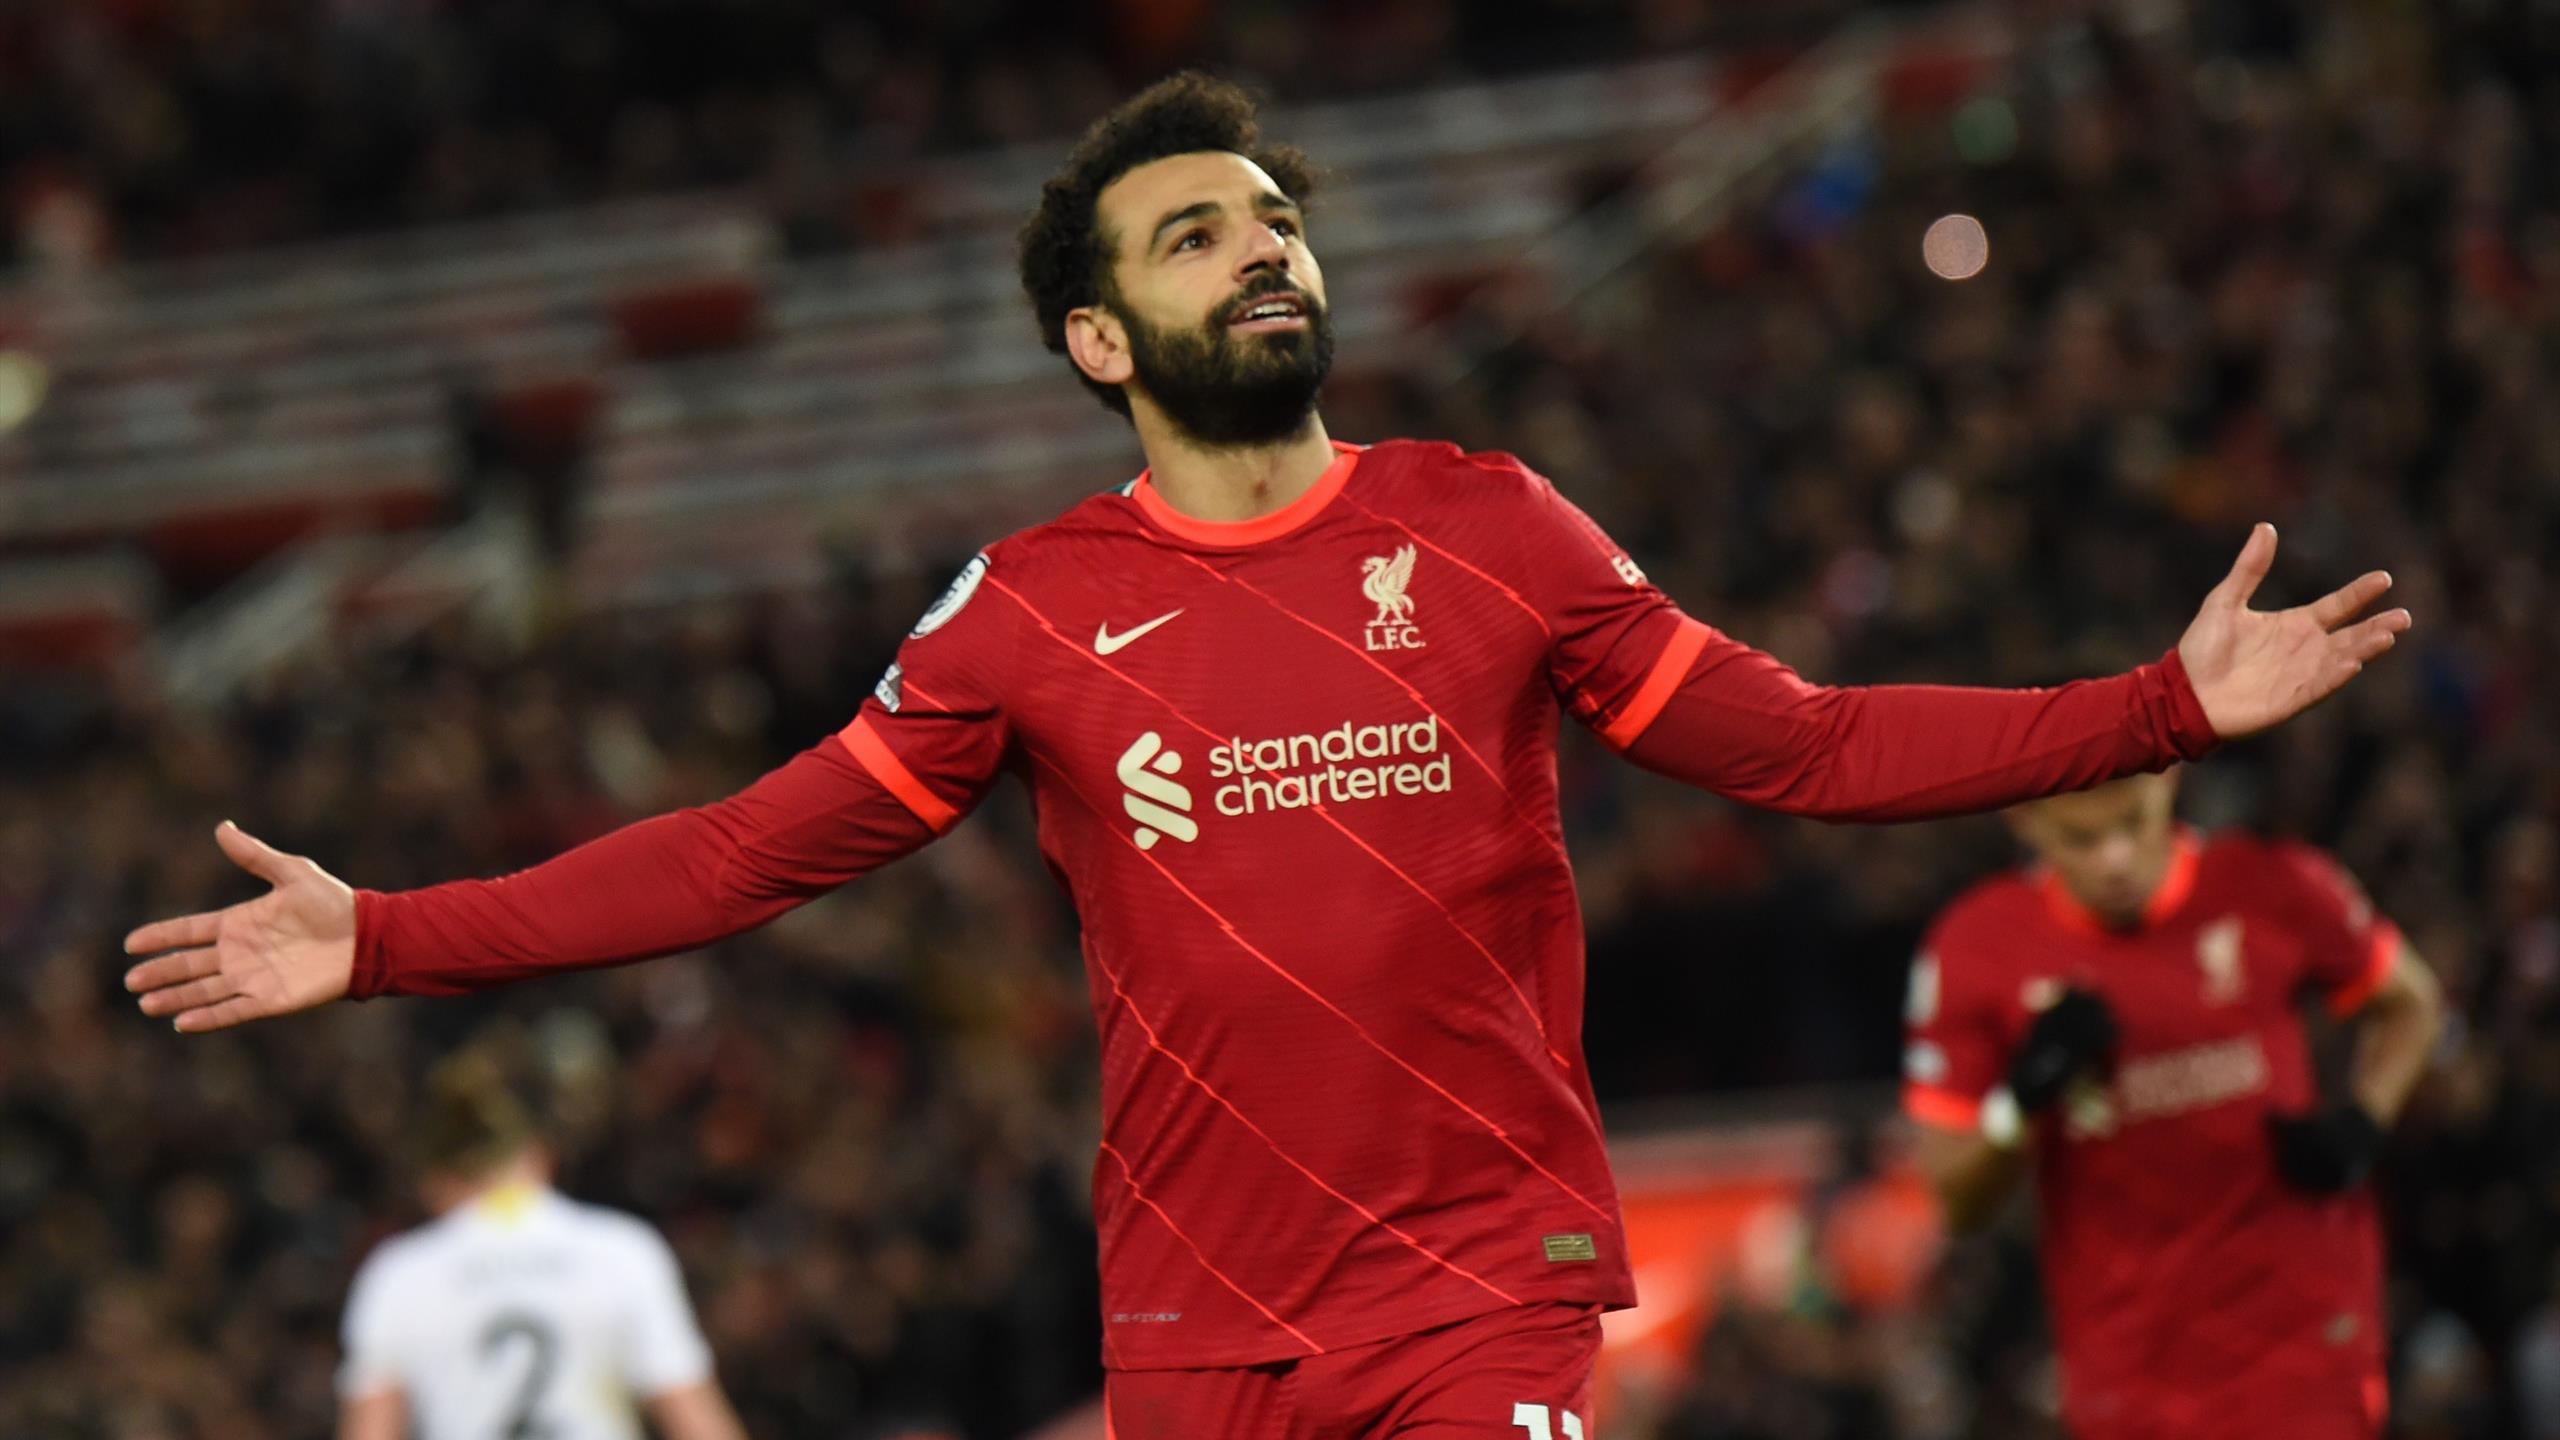 Mohamed Salah in Liverpool forever?  The Egyptian star is likely to extend his contract with the Reds